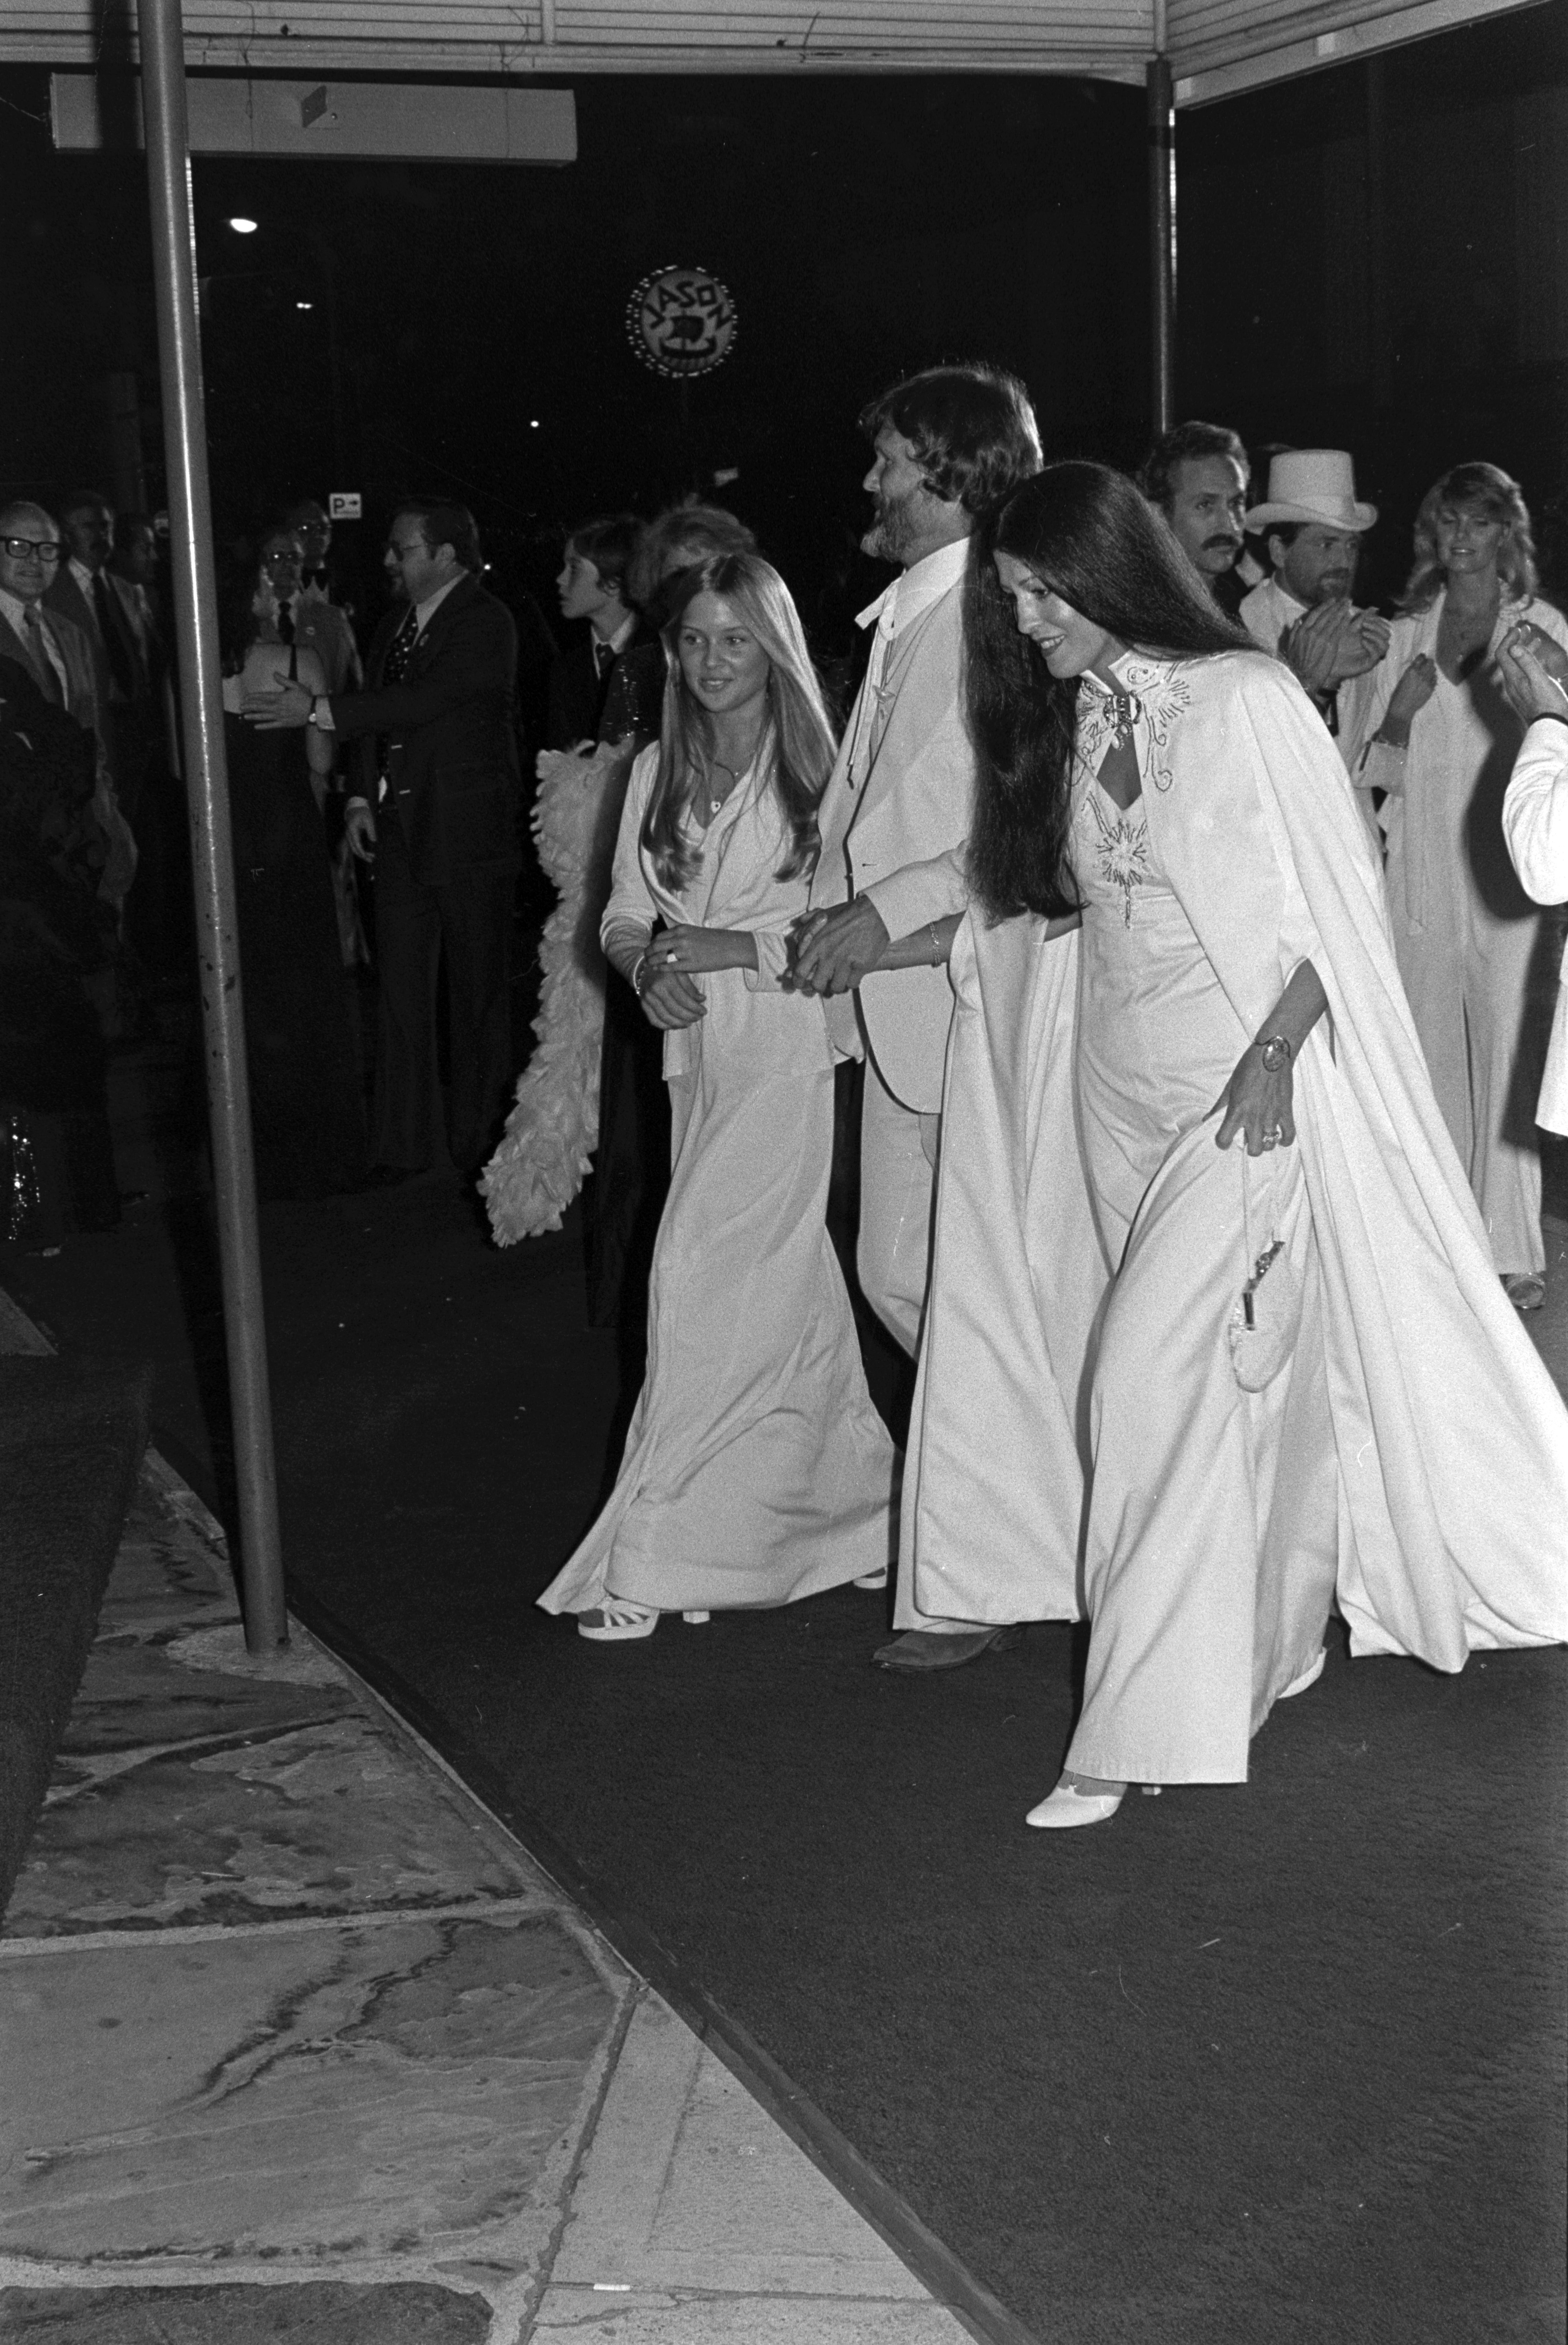 Tracy Kristofferson, Kris Kristofferson, and Rita Coolidge attend the premiere of "A Star Is Born" at Mann's Village Theater in Westwood, California, on December 18, 1976. | Source: Getty Images